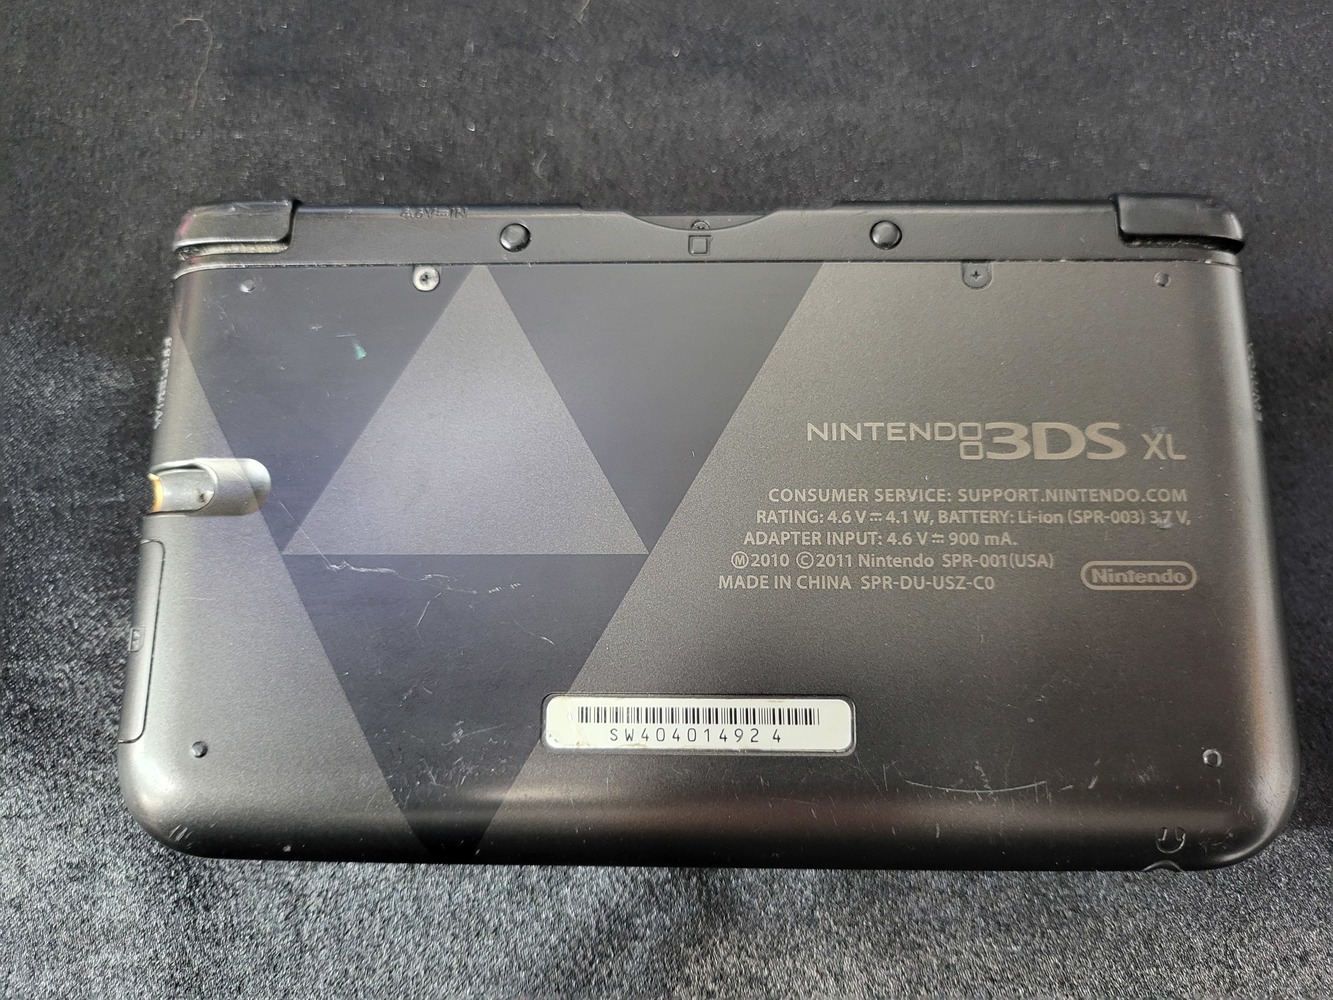 Nintendo 3DS Xl a link between worlds limited edition console RARE!